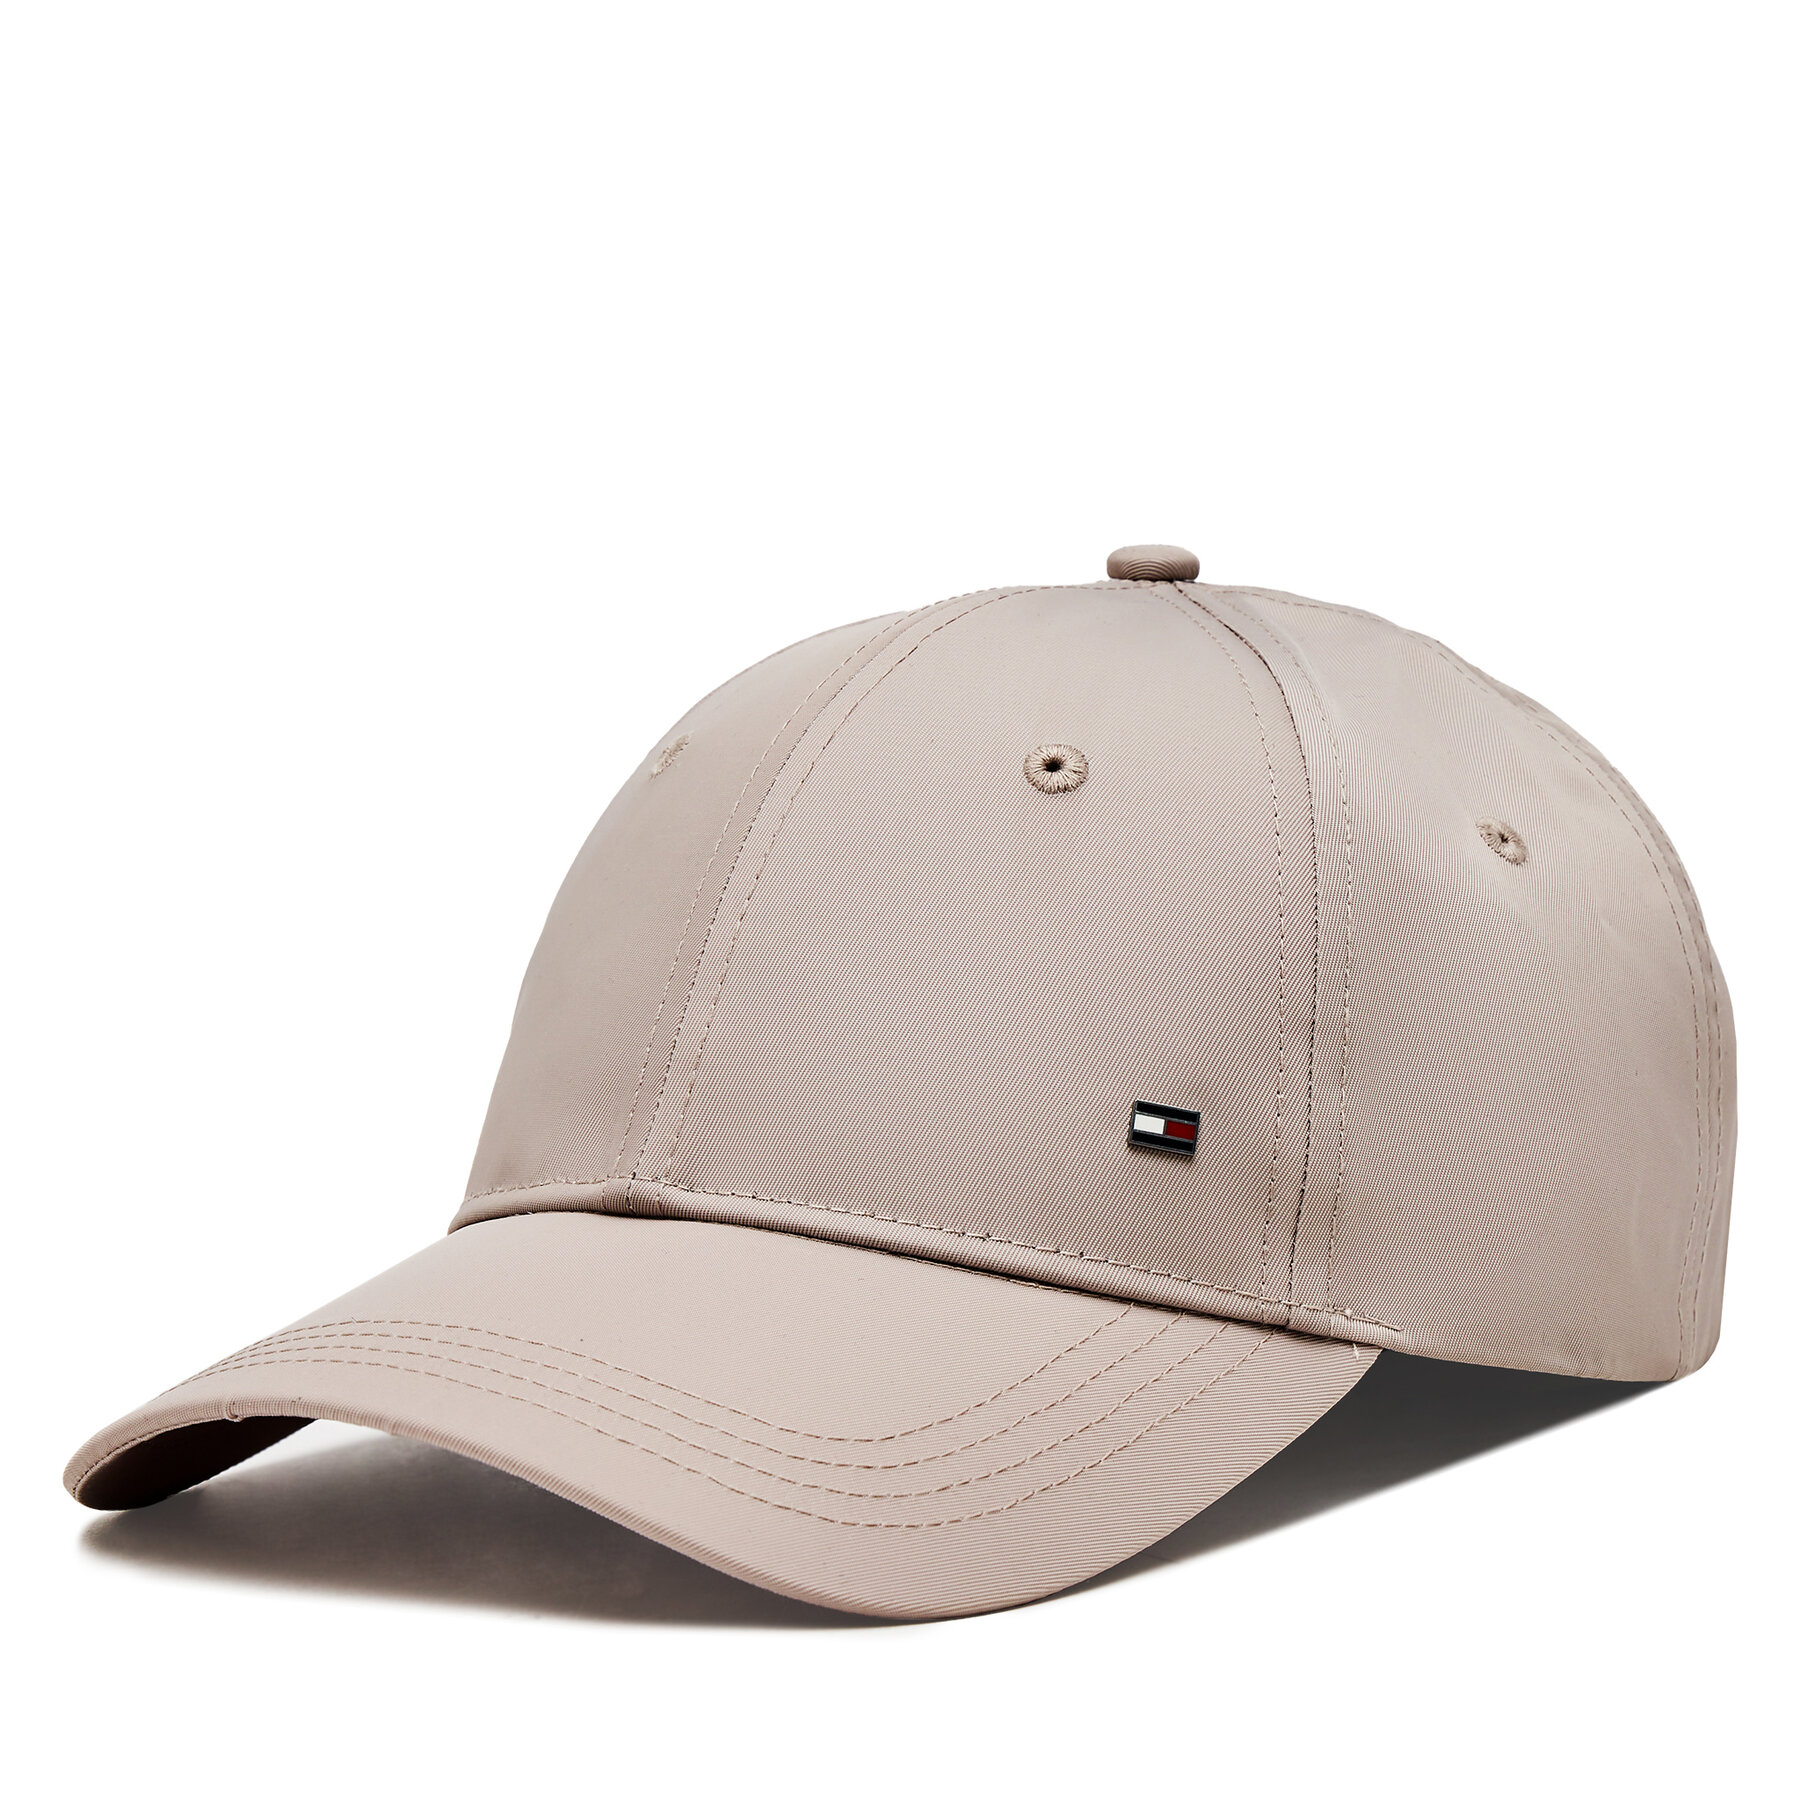 Cap Tommy Hilfiger Repreve Corporate Cap AM0AM12254 Smooth Taupe PKB von Tommy Hilfiger